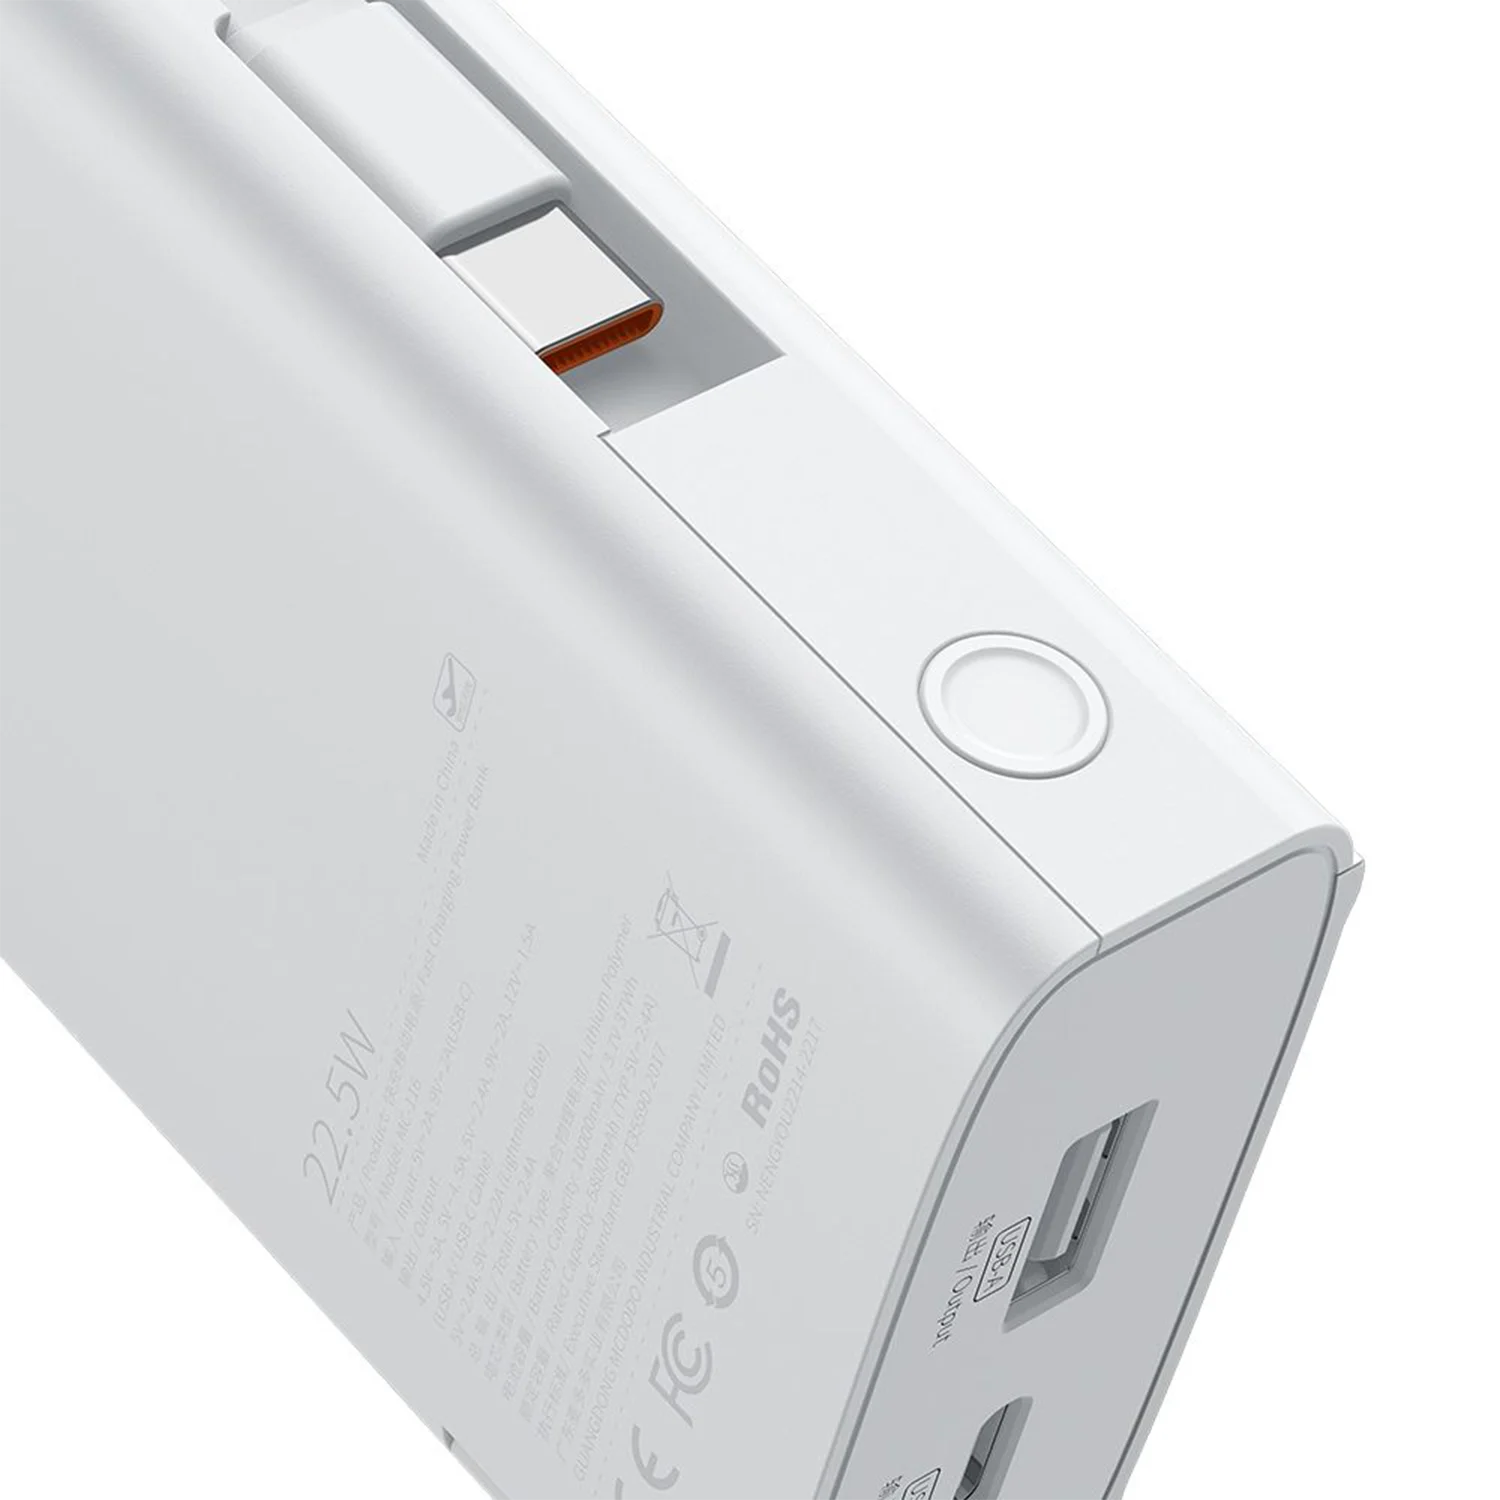 Mcdodo Noah Series 22.5W Power Bank 10000mAh with Built-in Cable (Lightning/Type-C)